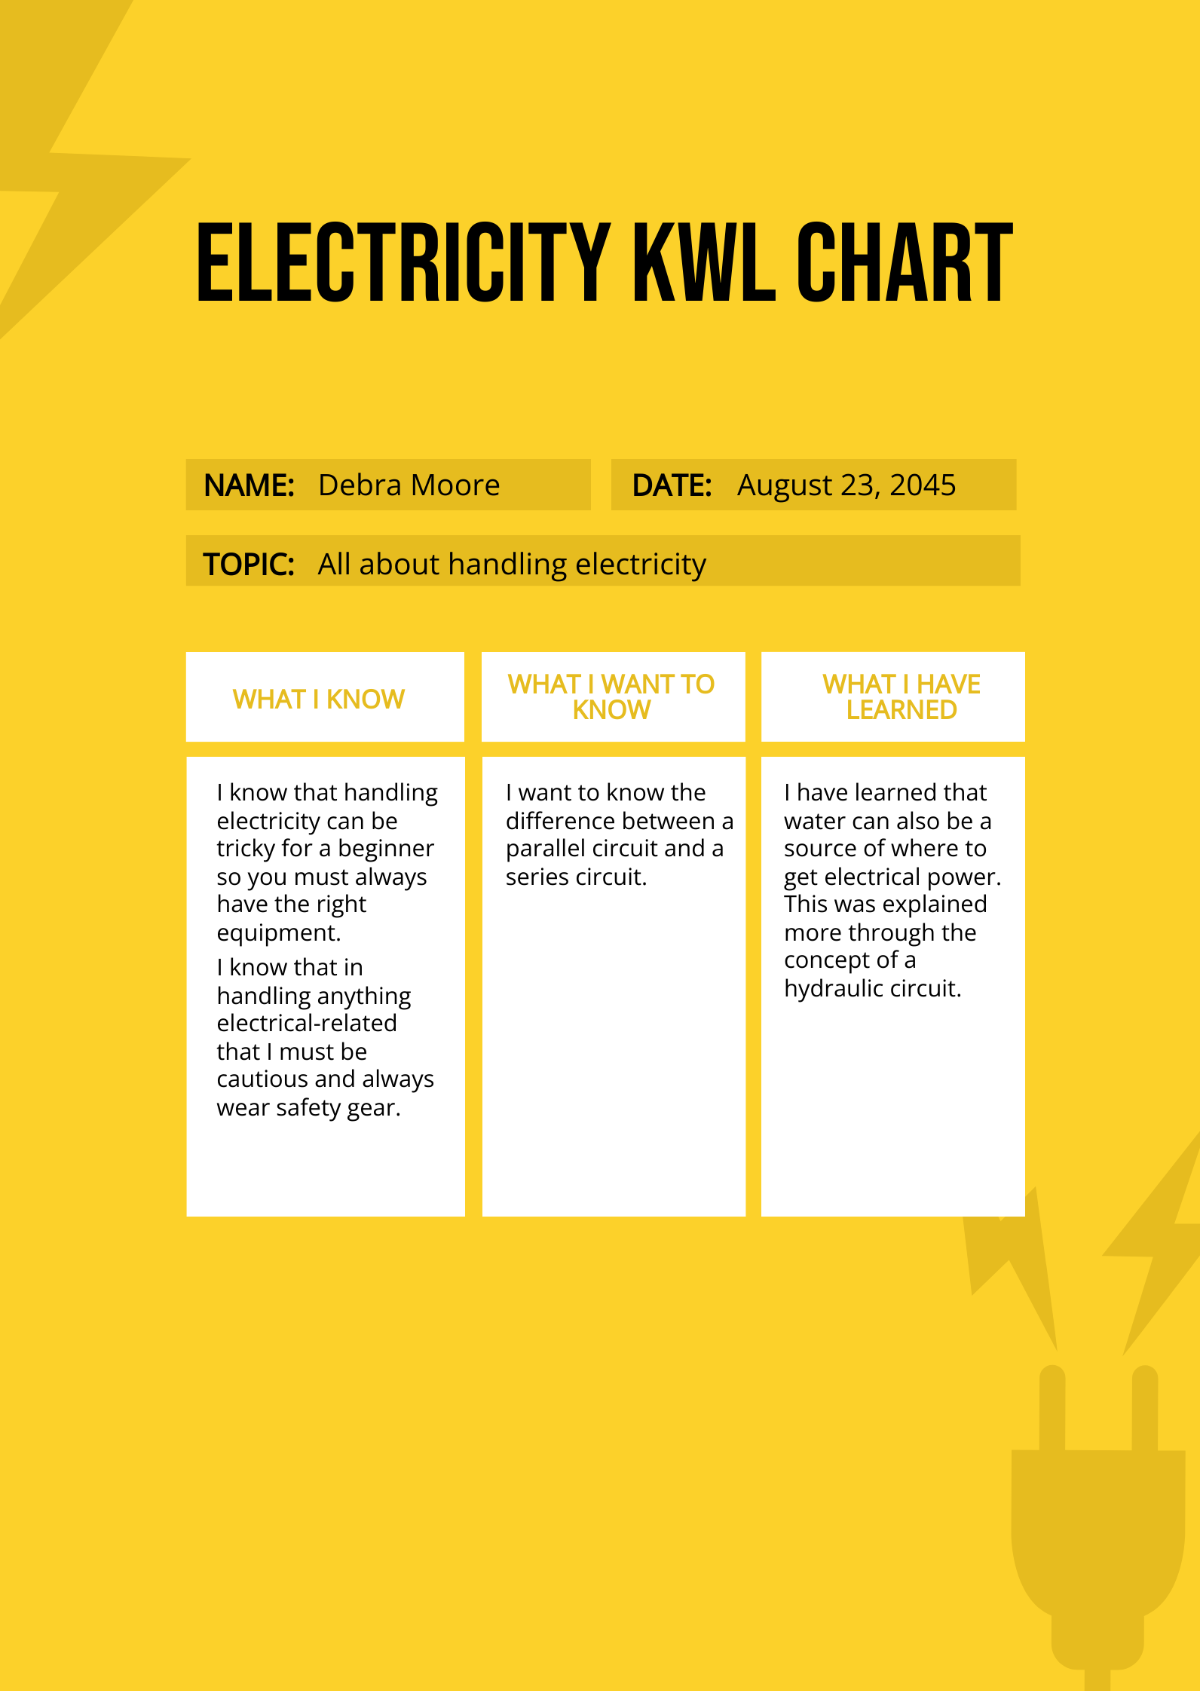 Electricity KWL Chart Template